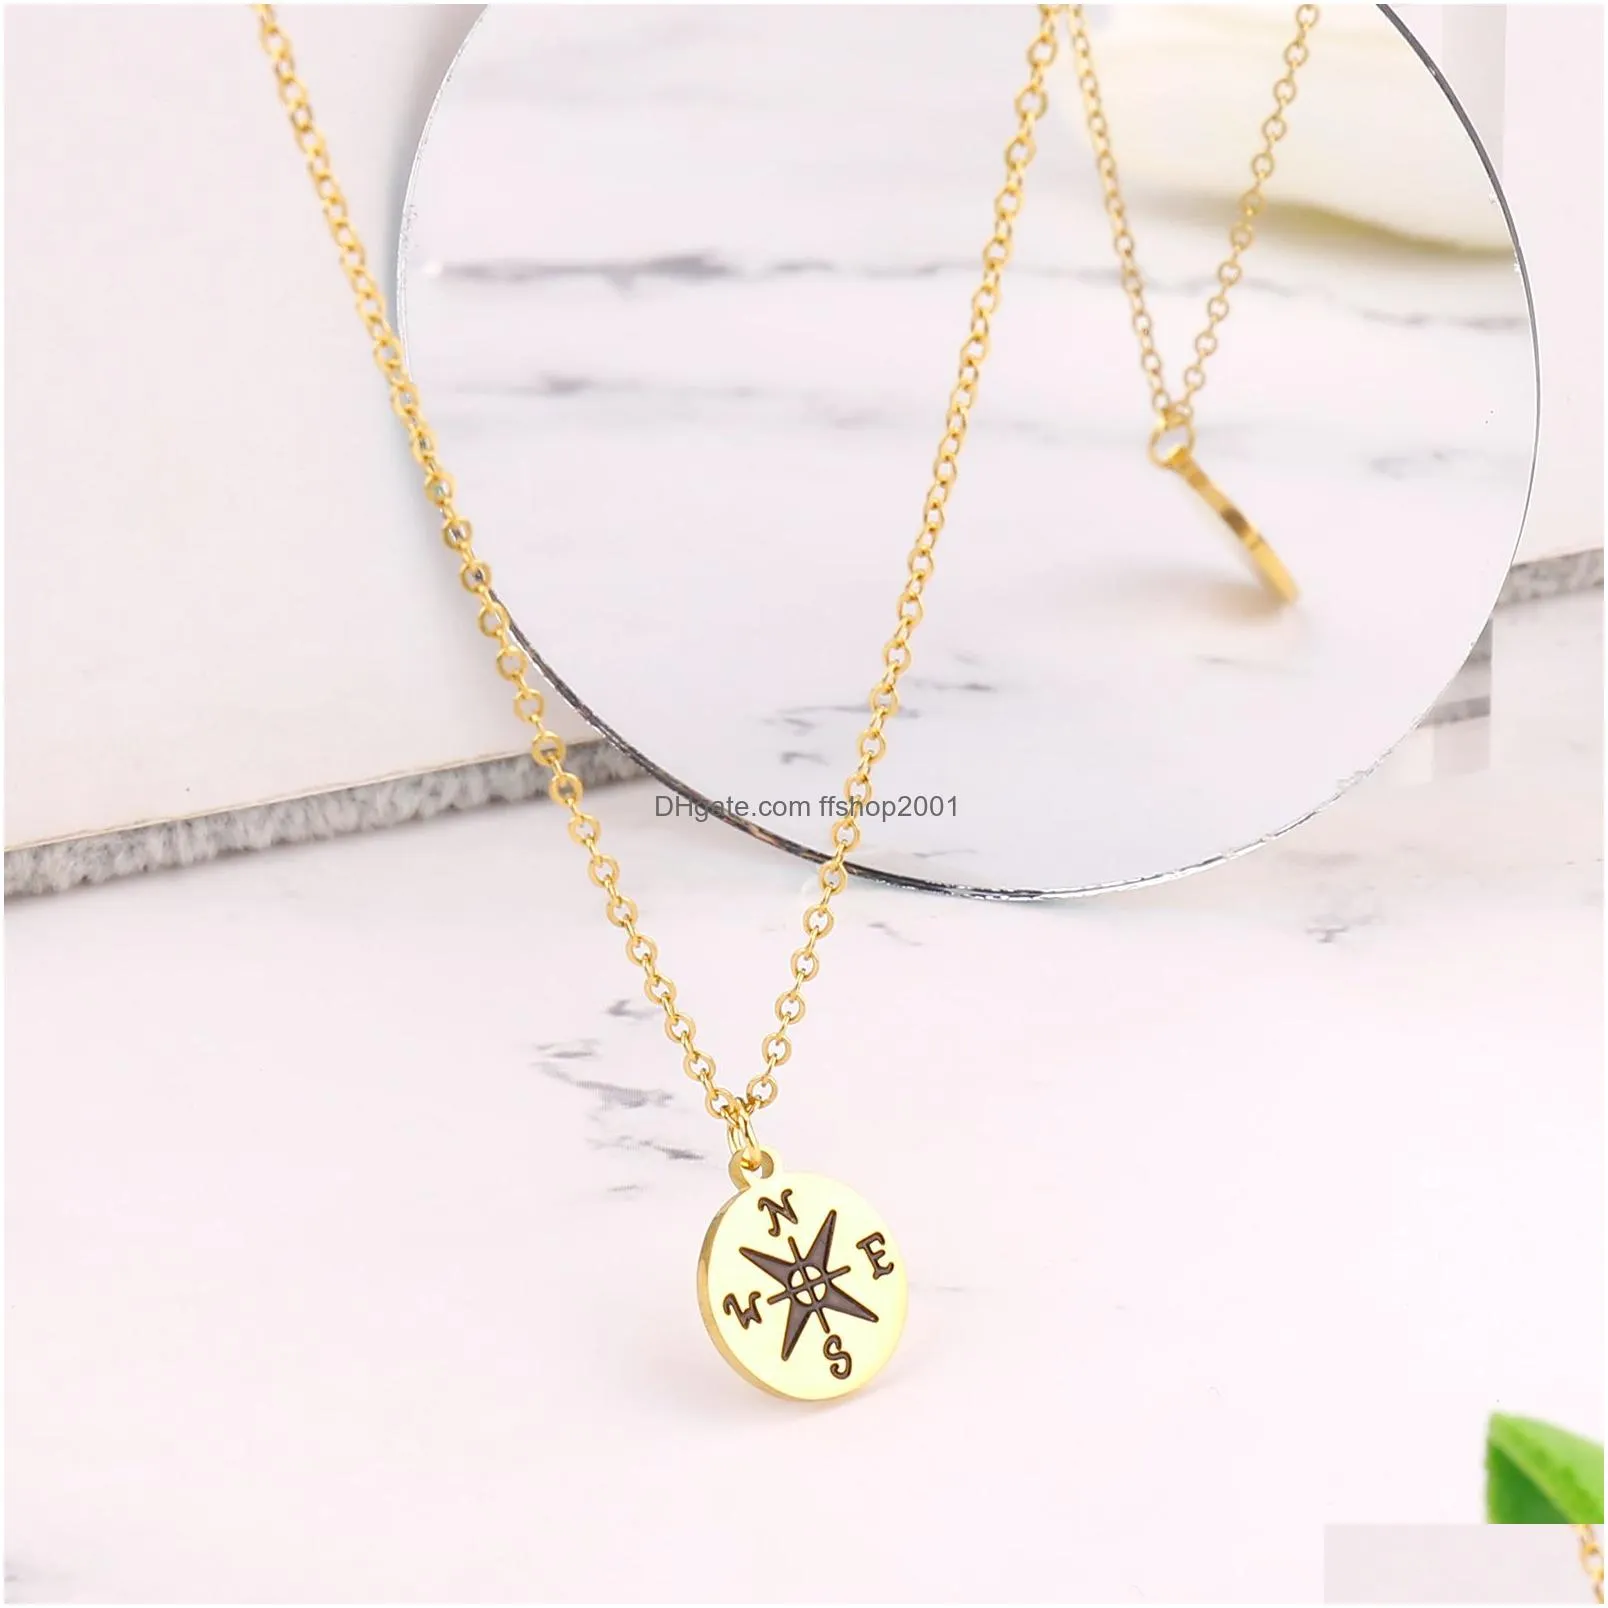 compass pendant necklace gold plated tiny stainless steel necklaces for women lover make wish jewelry